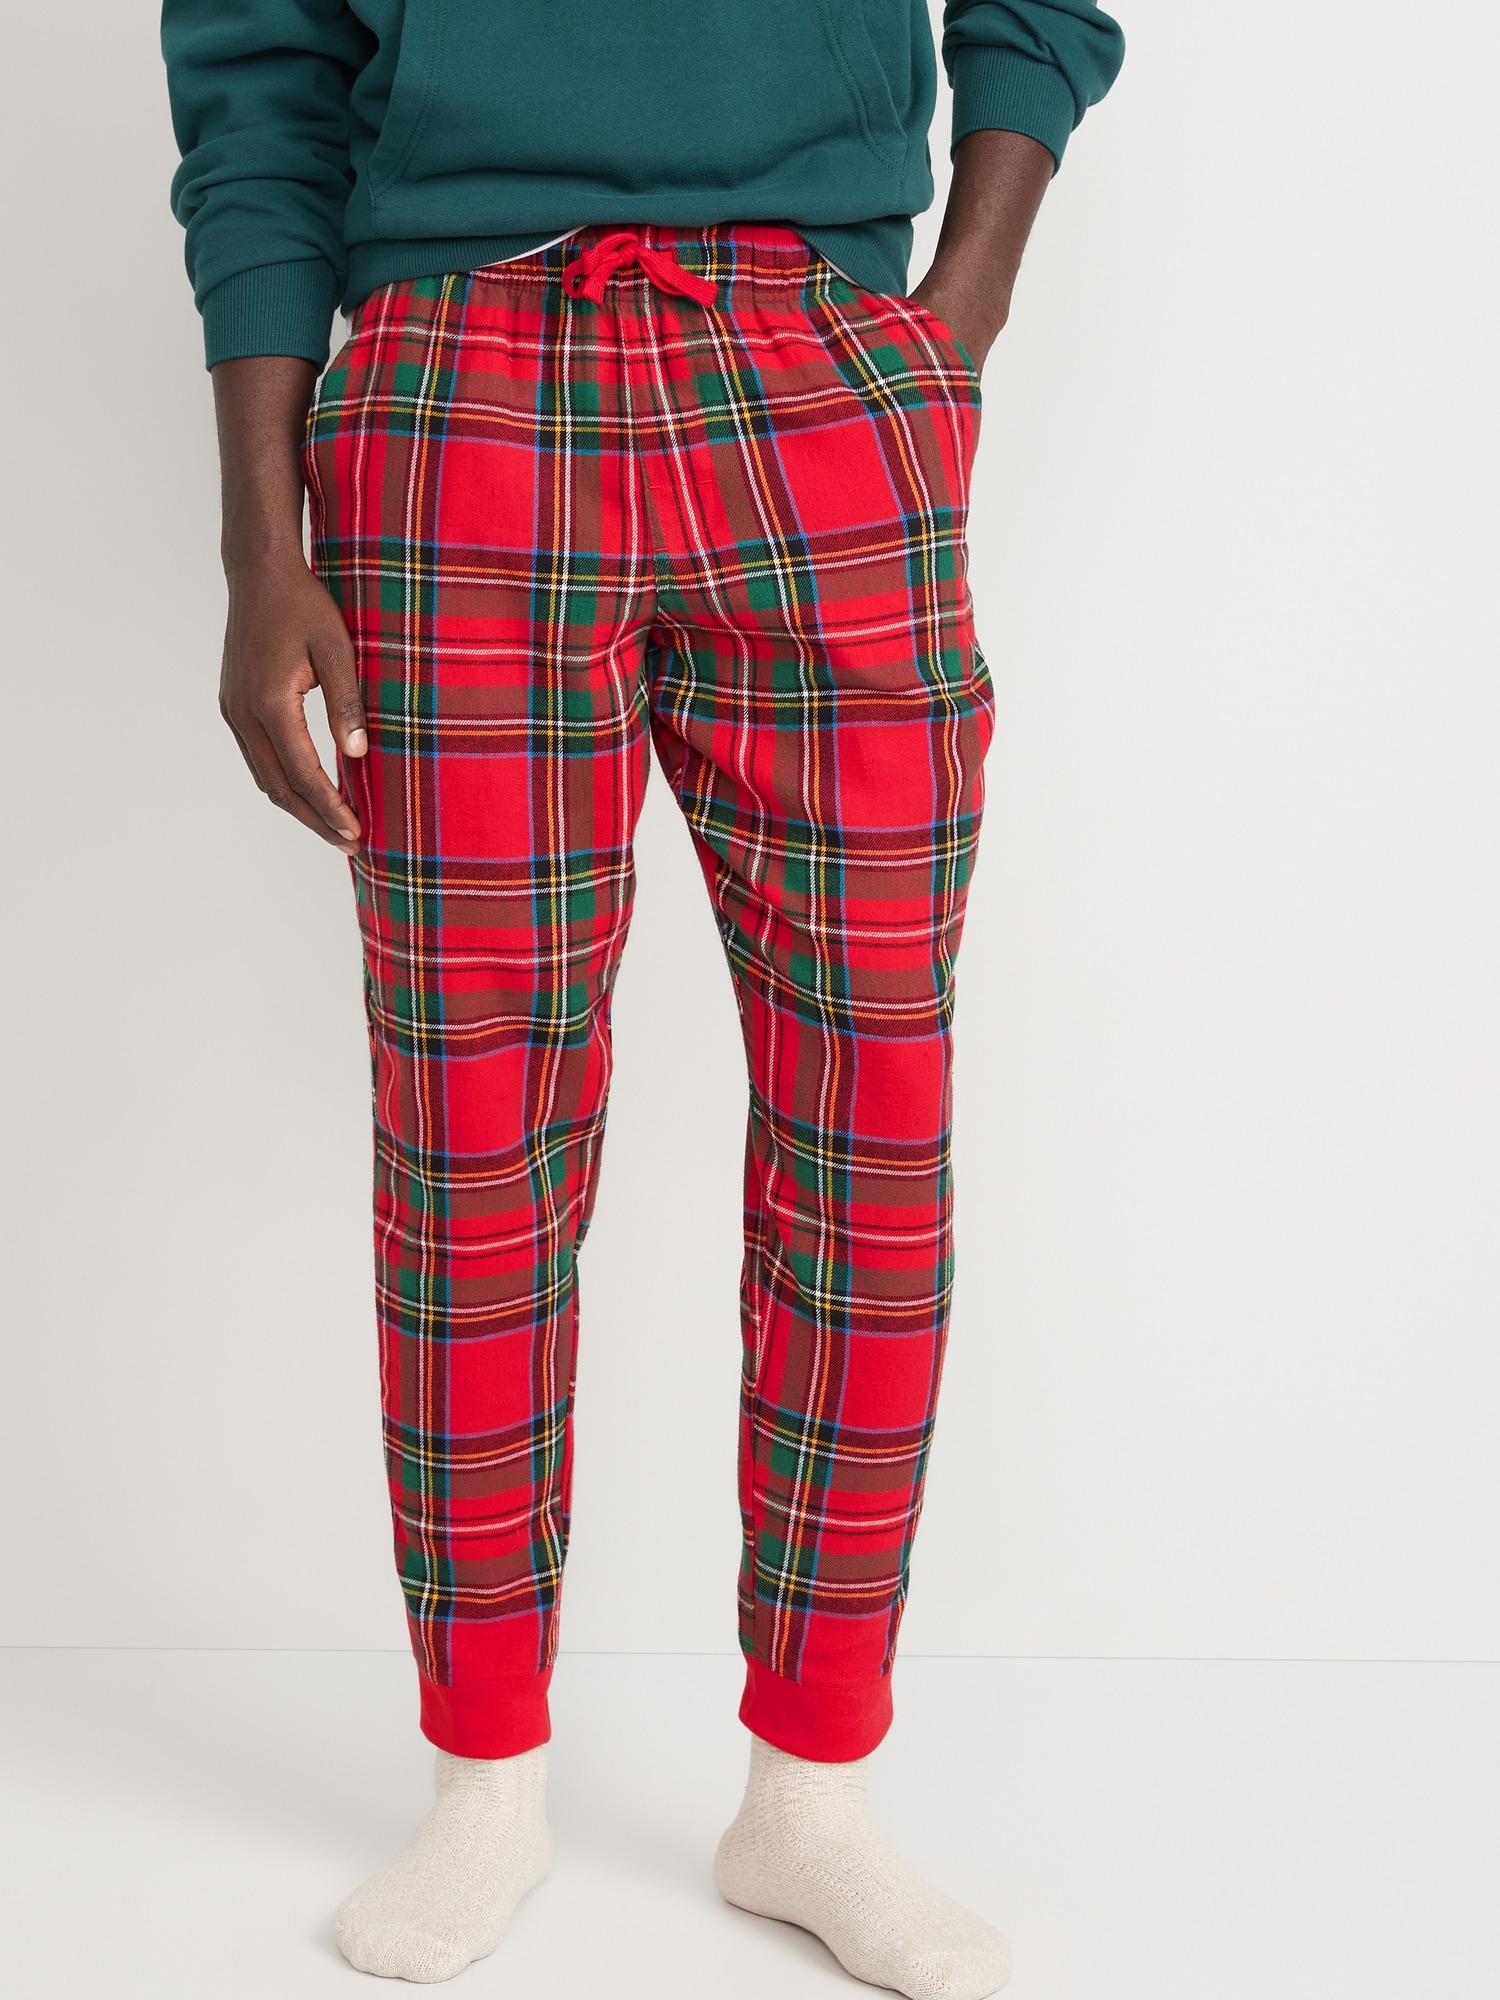 Old Navy Matching Plaid Flannel Jogger Pajama Pants for Men red. 1